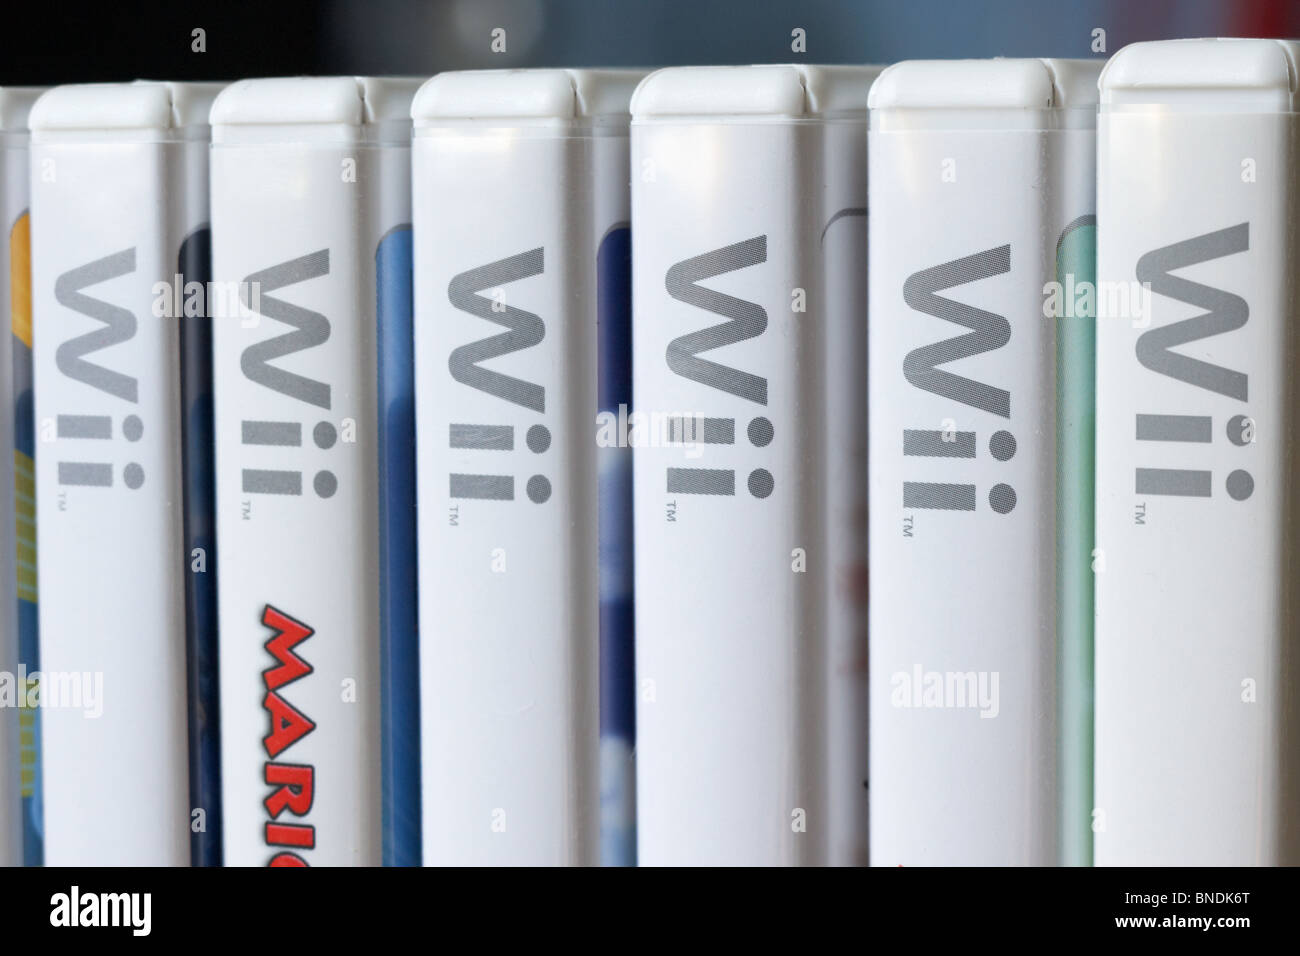 row of nintendo wii game cases in the uk Stock Photo